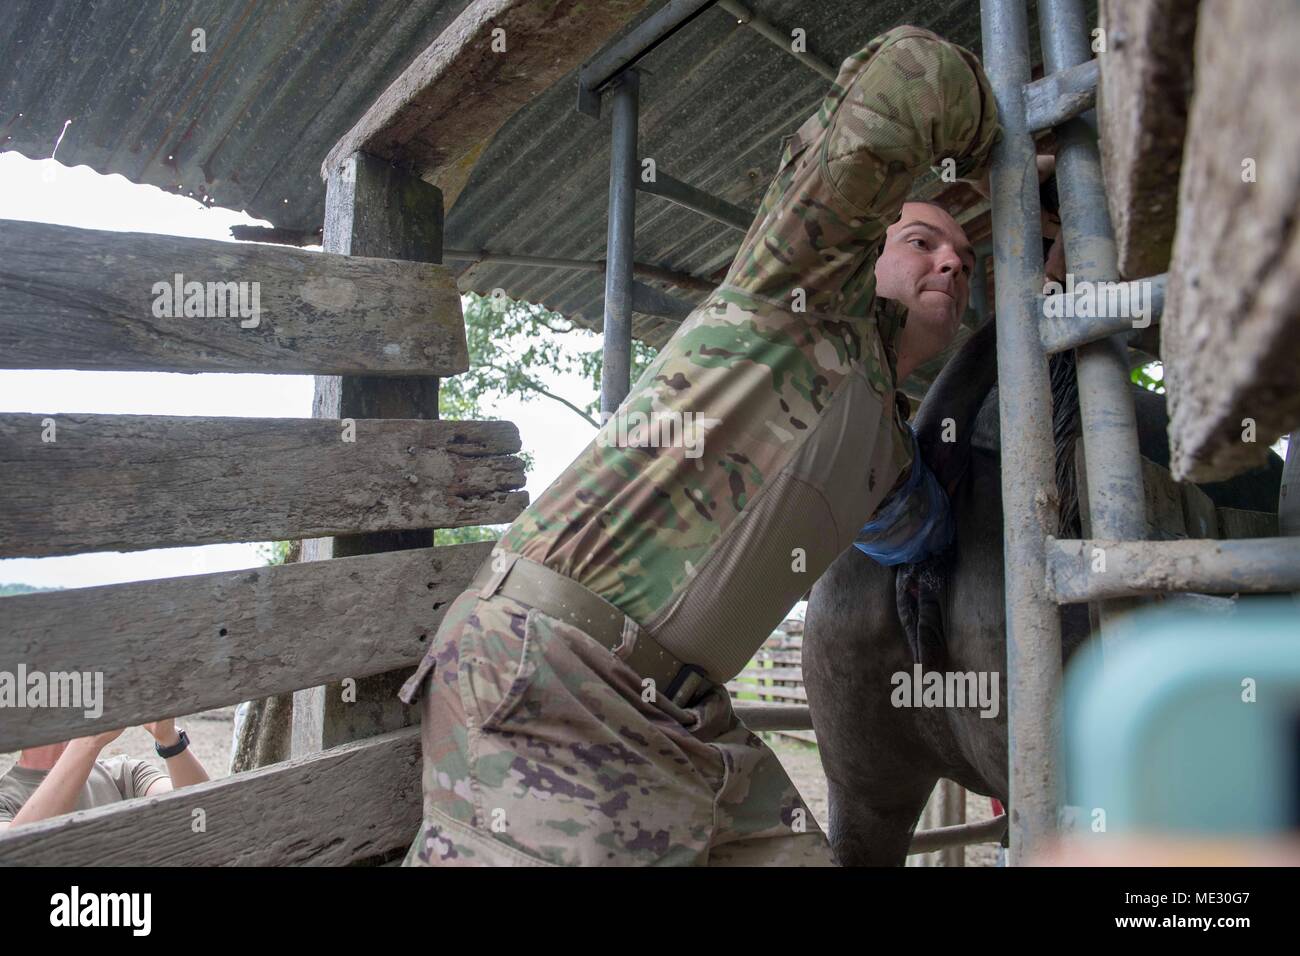 180417-N-HB733-0450 PUERTO BARRIOS, Guatemala  (April 17, 2018) Maj. Richard Brooksby of Manteca, California, performs a rectal exam on a water buffalo to determine if she is pregnant at the Hacienda La Providencia Farm in Puerto Barrios, Guatemala during Continuing Promise 2018 . U.S. Naval Forces Southern Command/U.S. 4th Fleet has deployed a force to execute Continuing Promise to conduct civil-military operations including humanitarian assistance, training engagements, and medical, dental, and veterinary support in an effort to show U.S. support and commitment to Central and South America.  Stock Photo